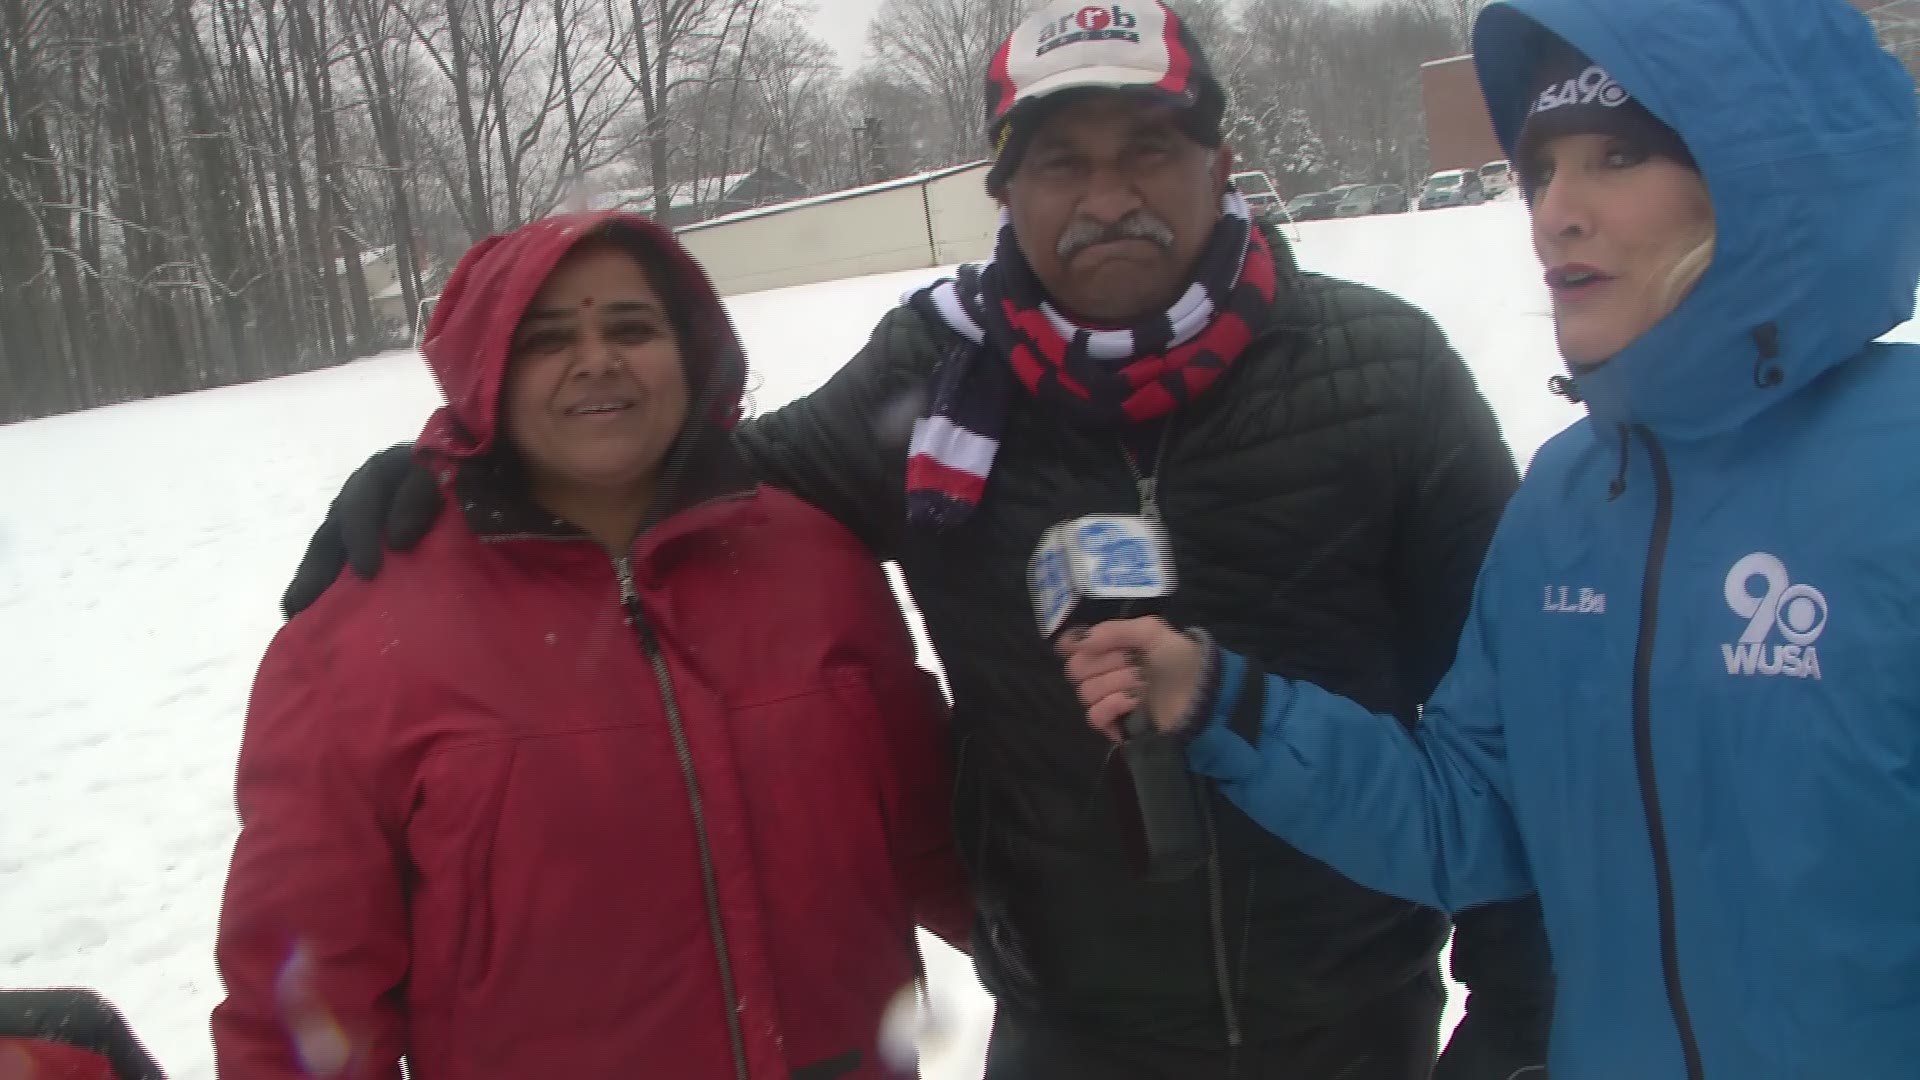 Couple from New Delhi, India sees snow for the first time while celebrating their anniversary in Virginia.